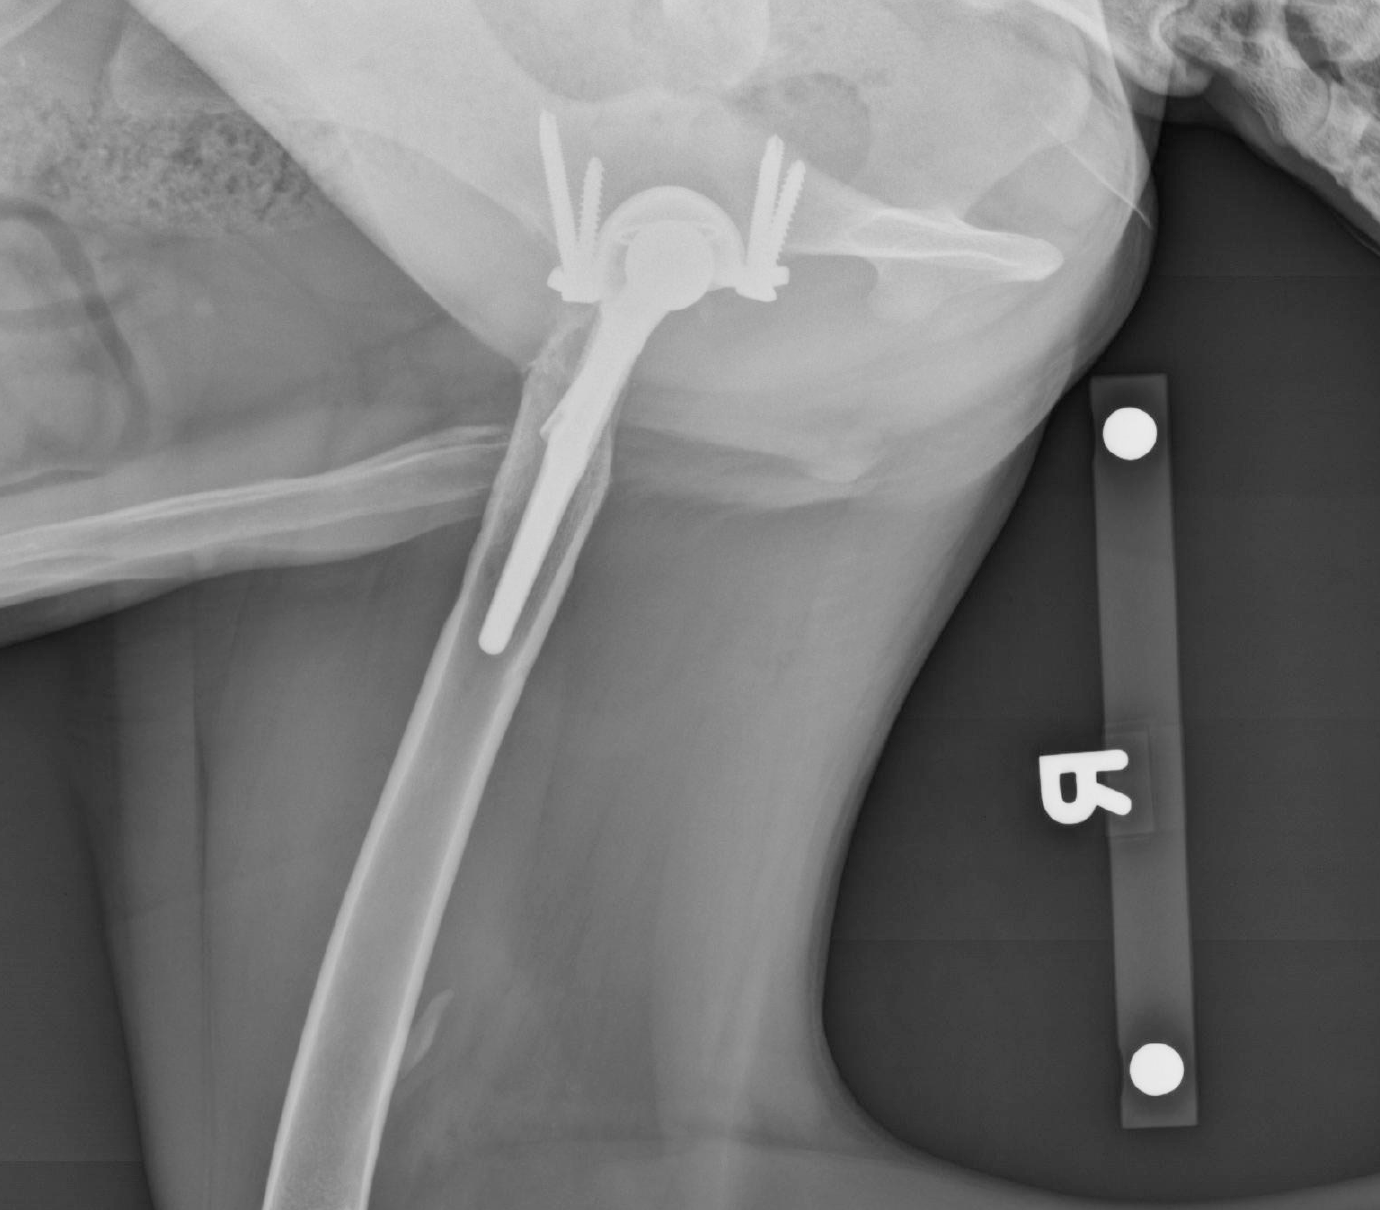 Dexter - Radiograph showing custom implant after surgery